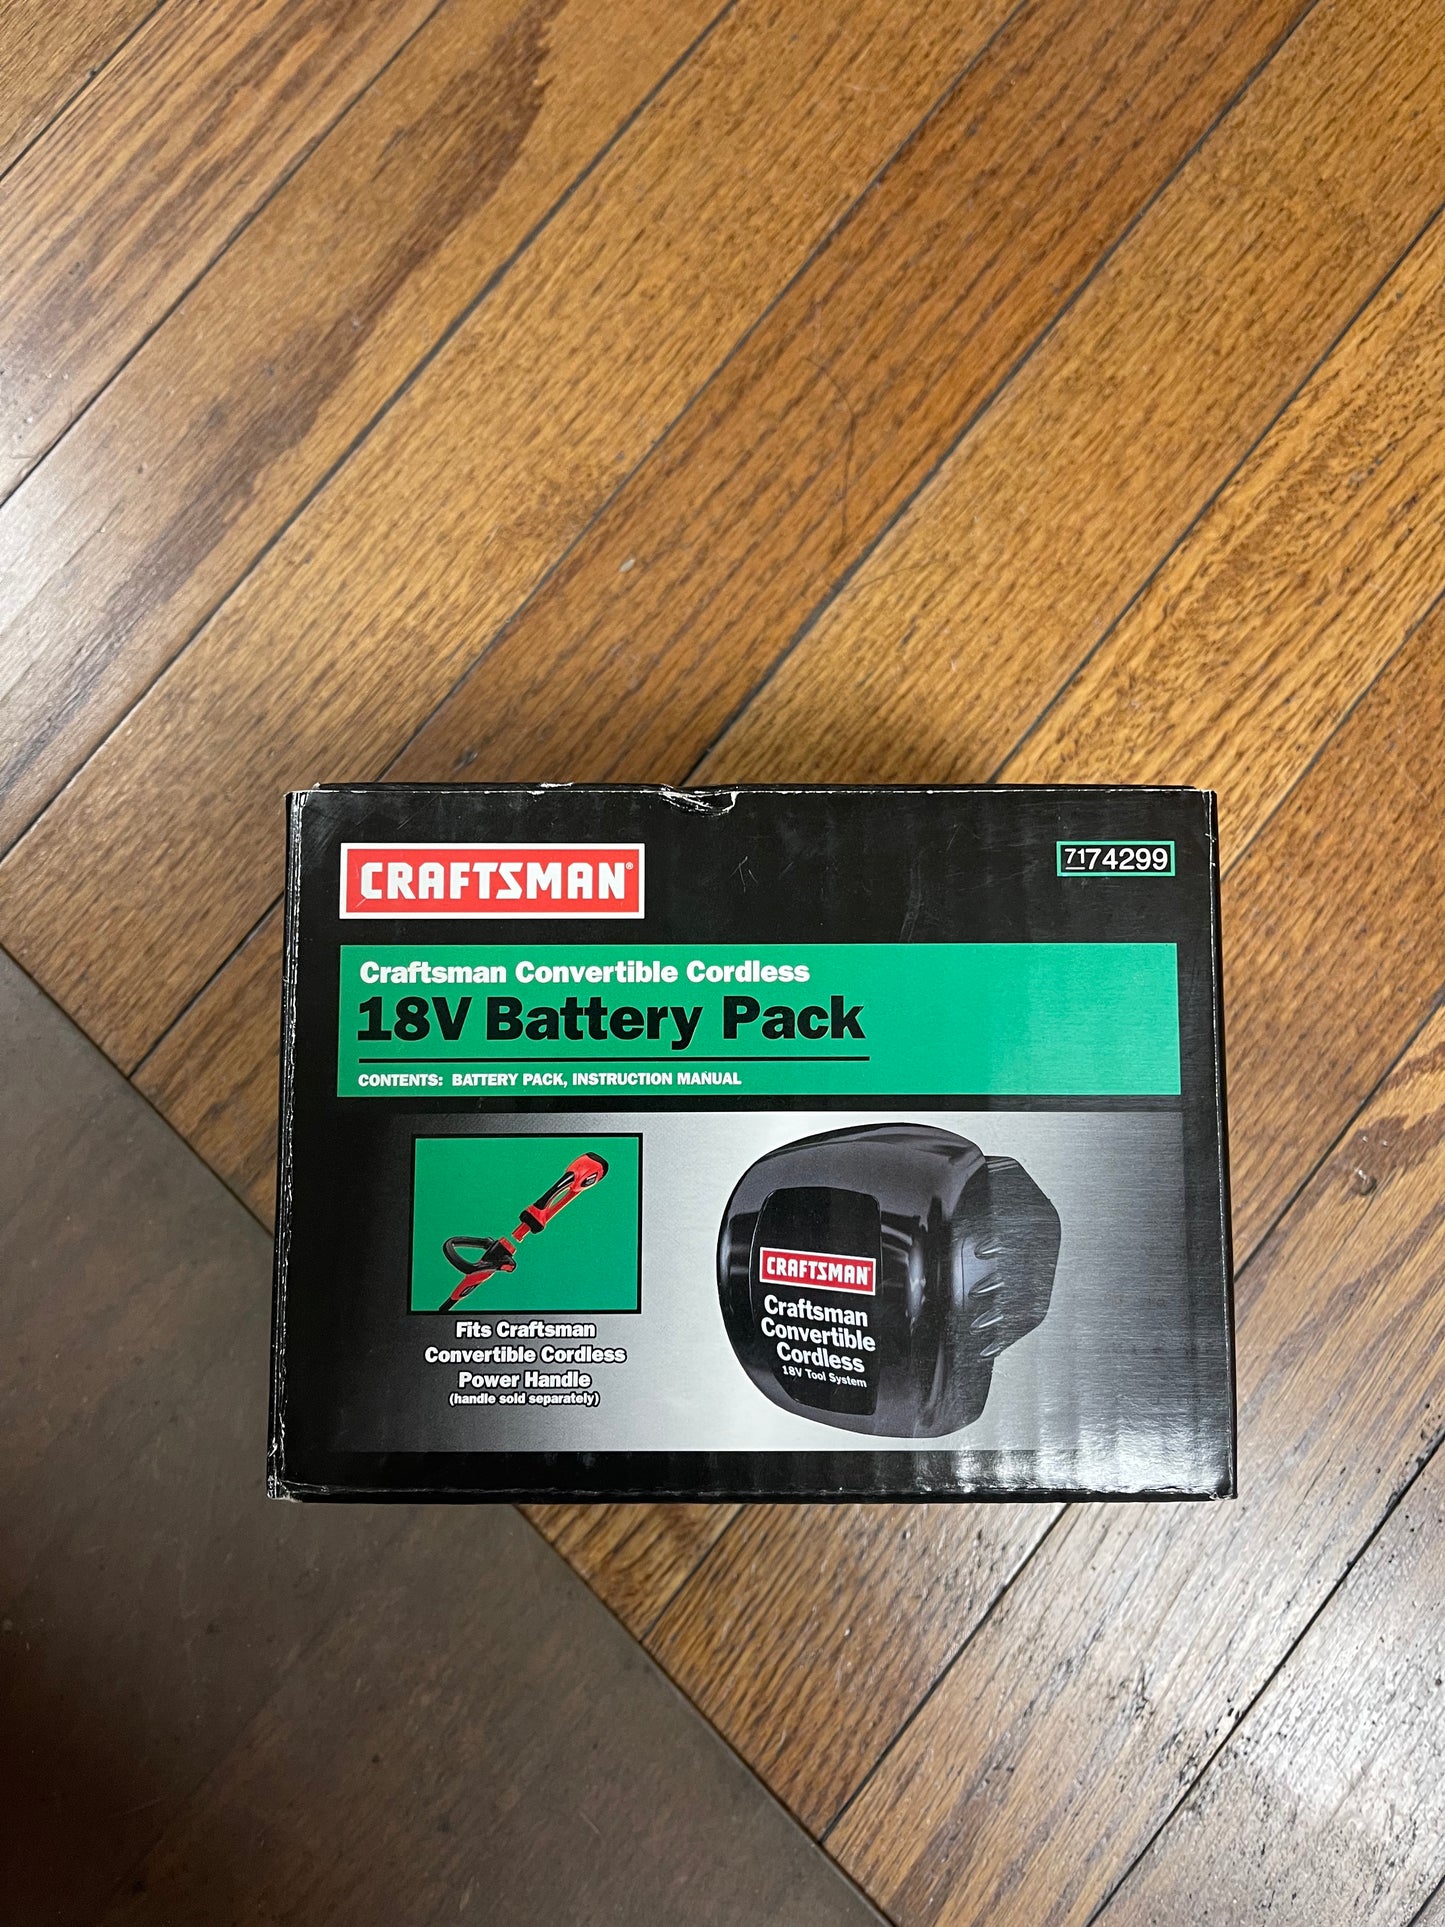 Craftsman 18V Convertible Cordless Battery Pack New In The Box